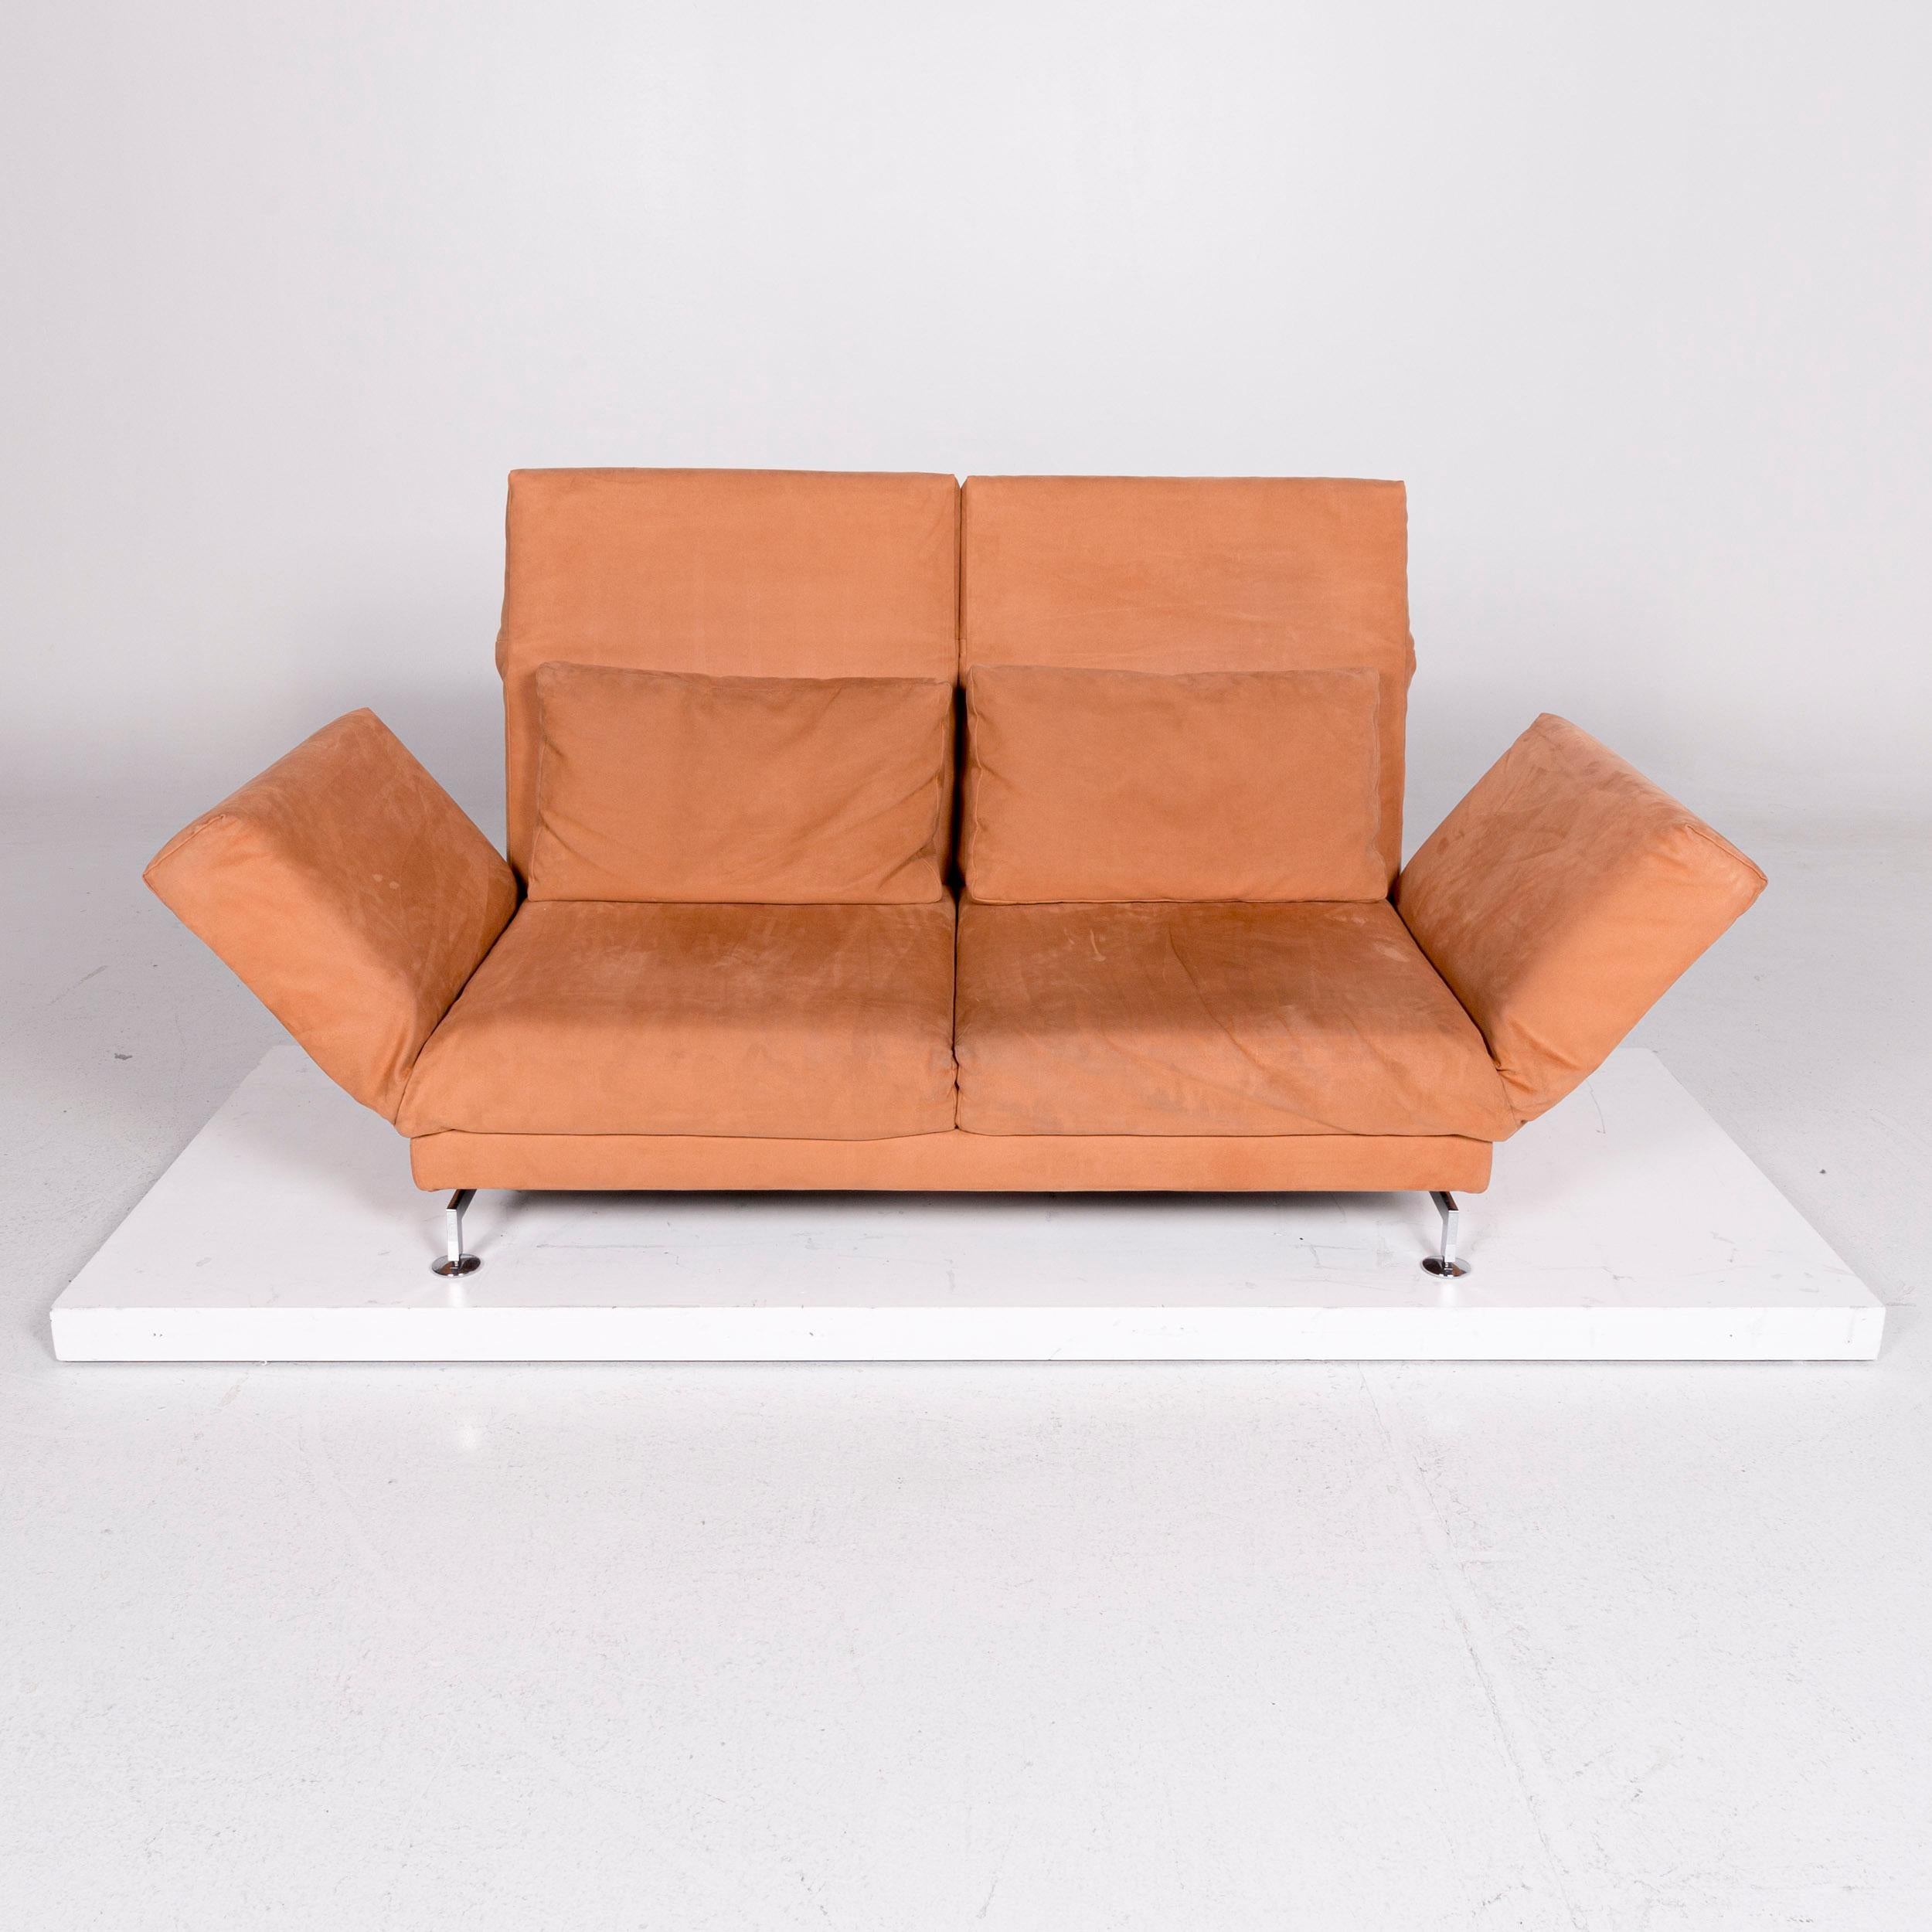 Brühl & Sippold Moule Fabric Sofa Orange Two-Seat Relax Function For Sale 1